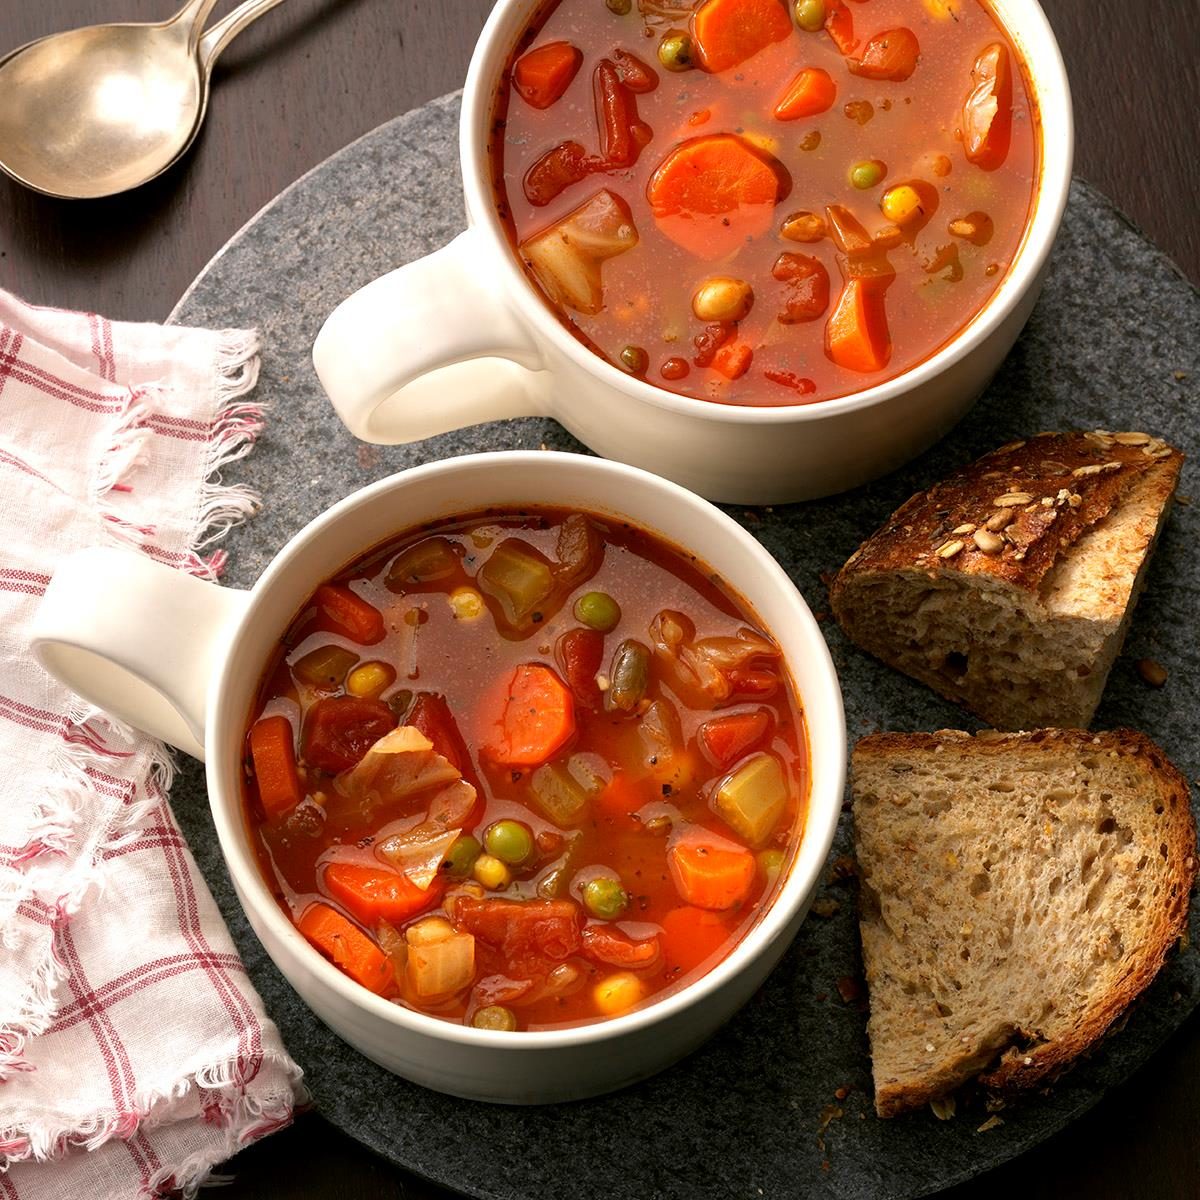 50 Diabetic-Friendly Soups to Cozy Up With